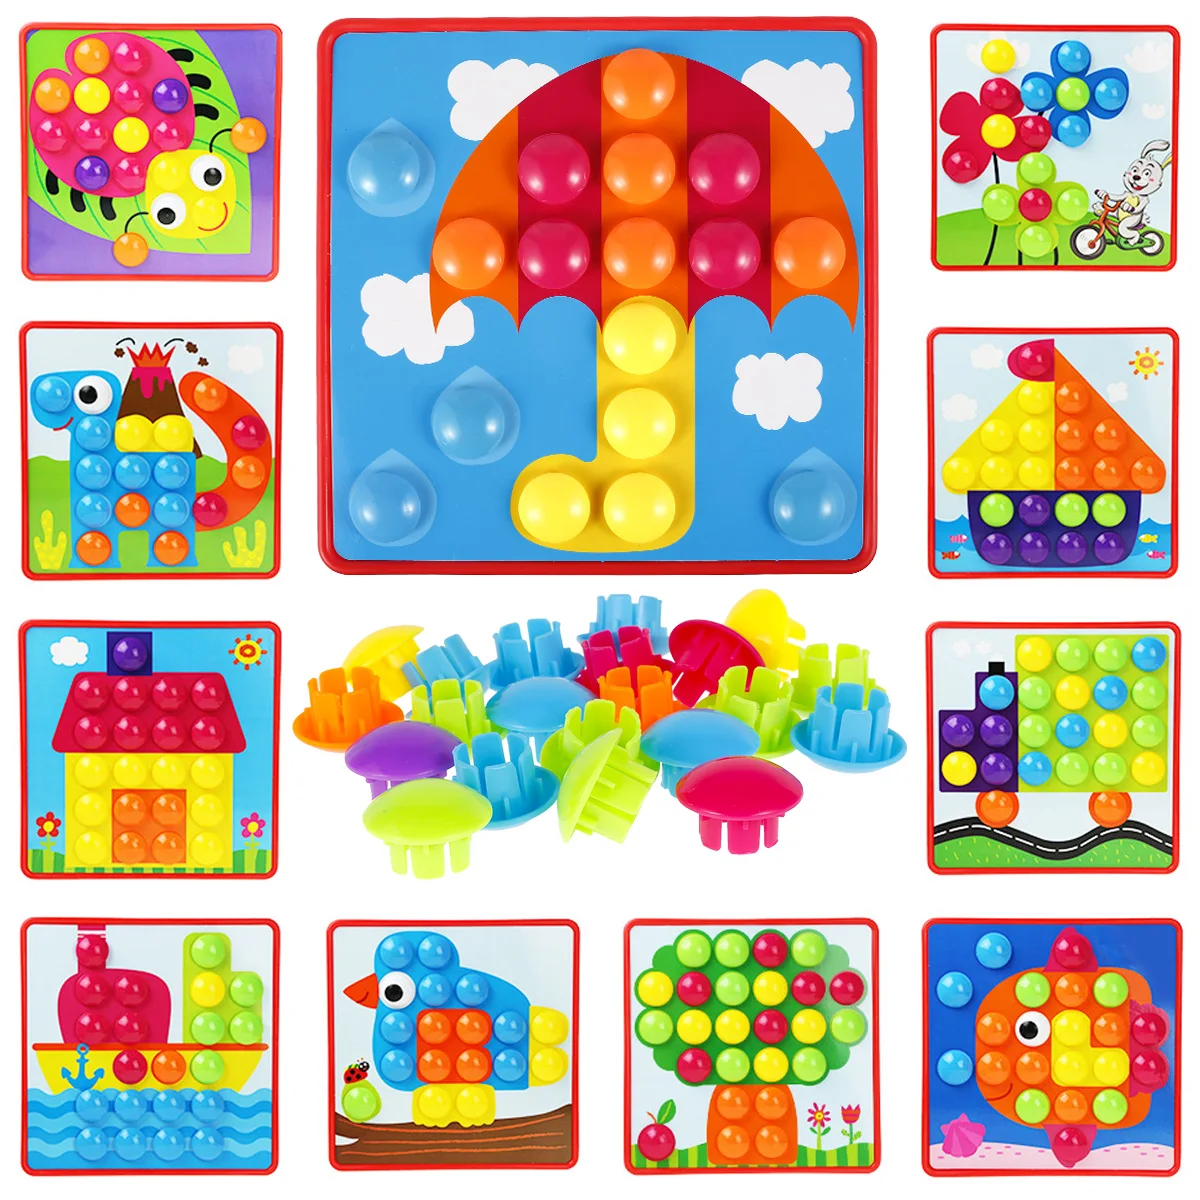 

3D Puzzle Mushroom Nail Puzzle Toy Button Art Assembling Jigsaw Board Geometric Shape Early Educational Toys for Children